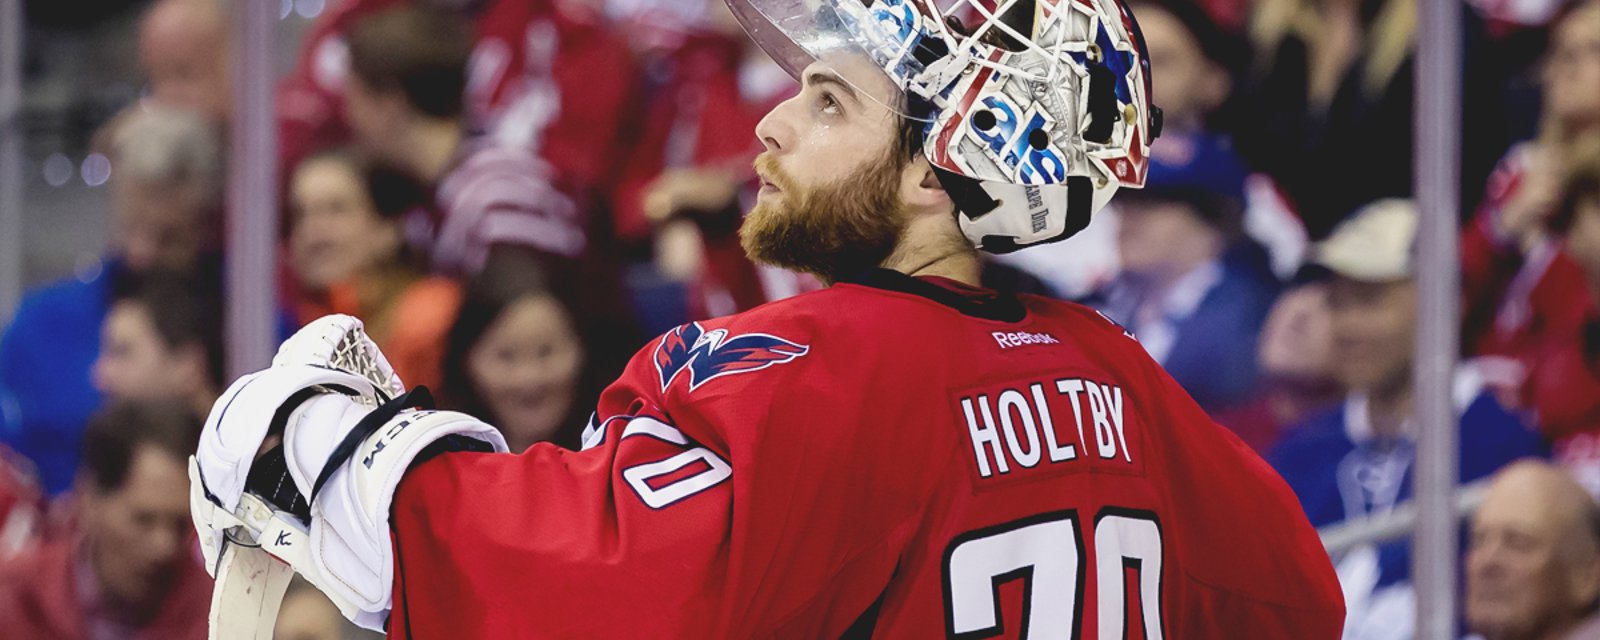 BREAKING: Caps cancel practice, Holtby skates anyway.